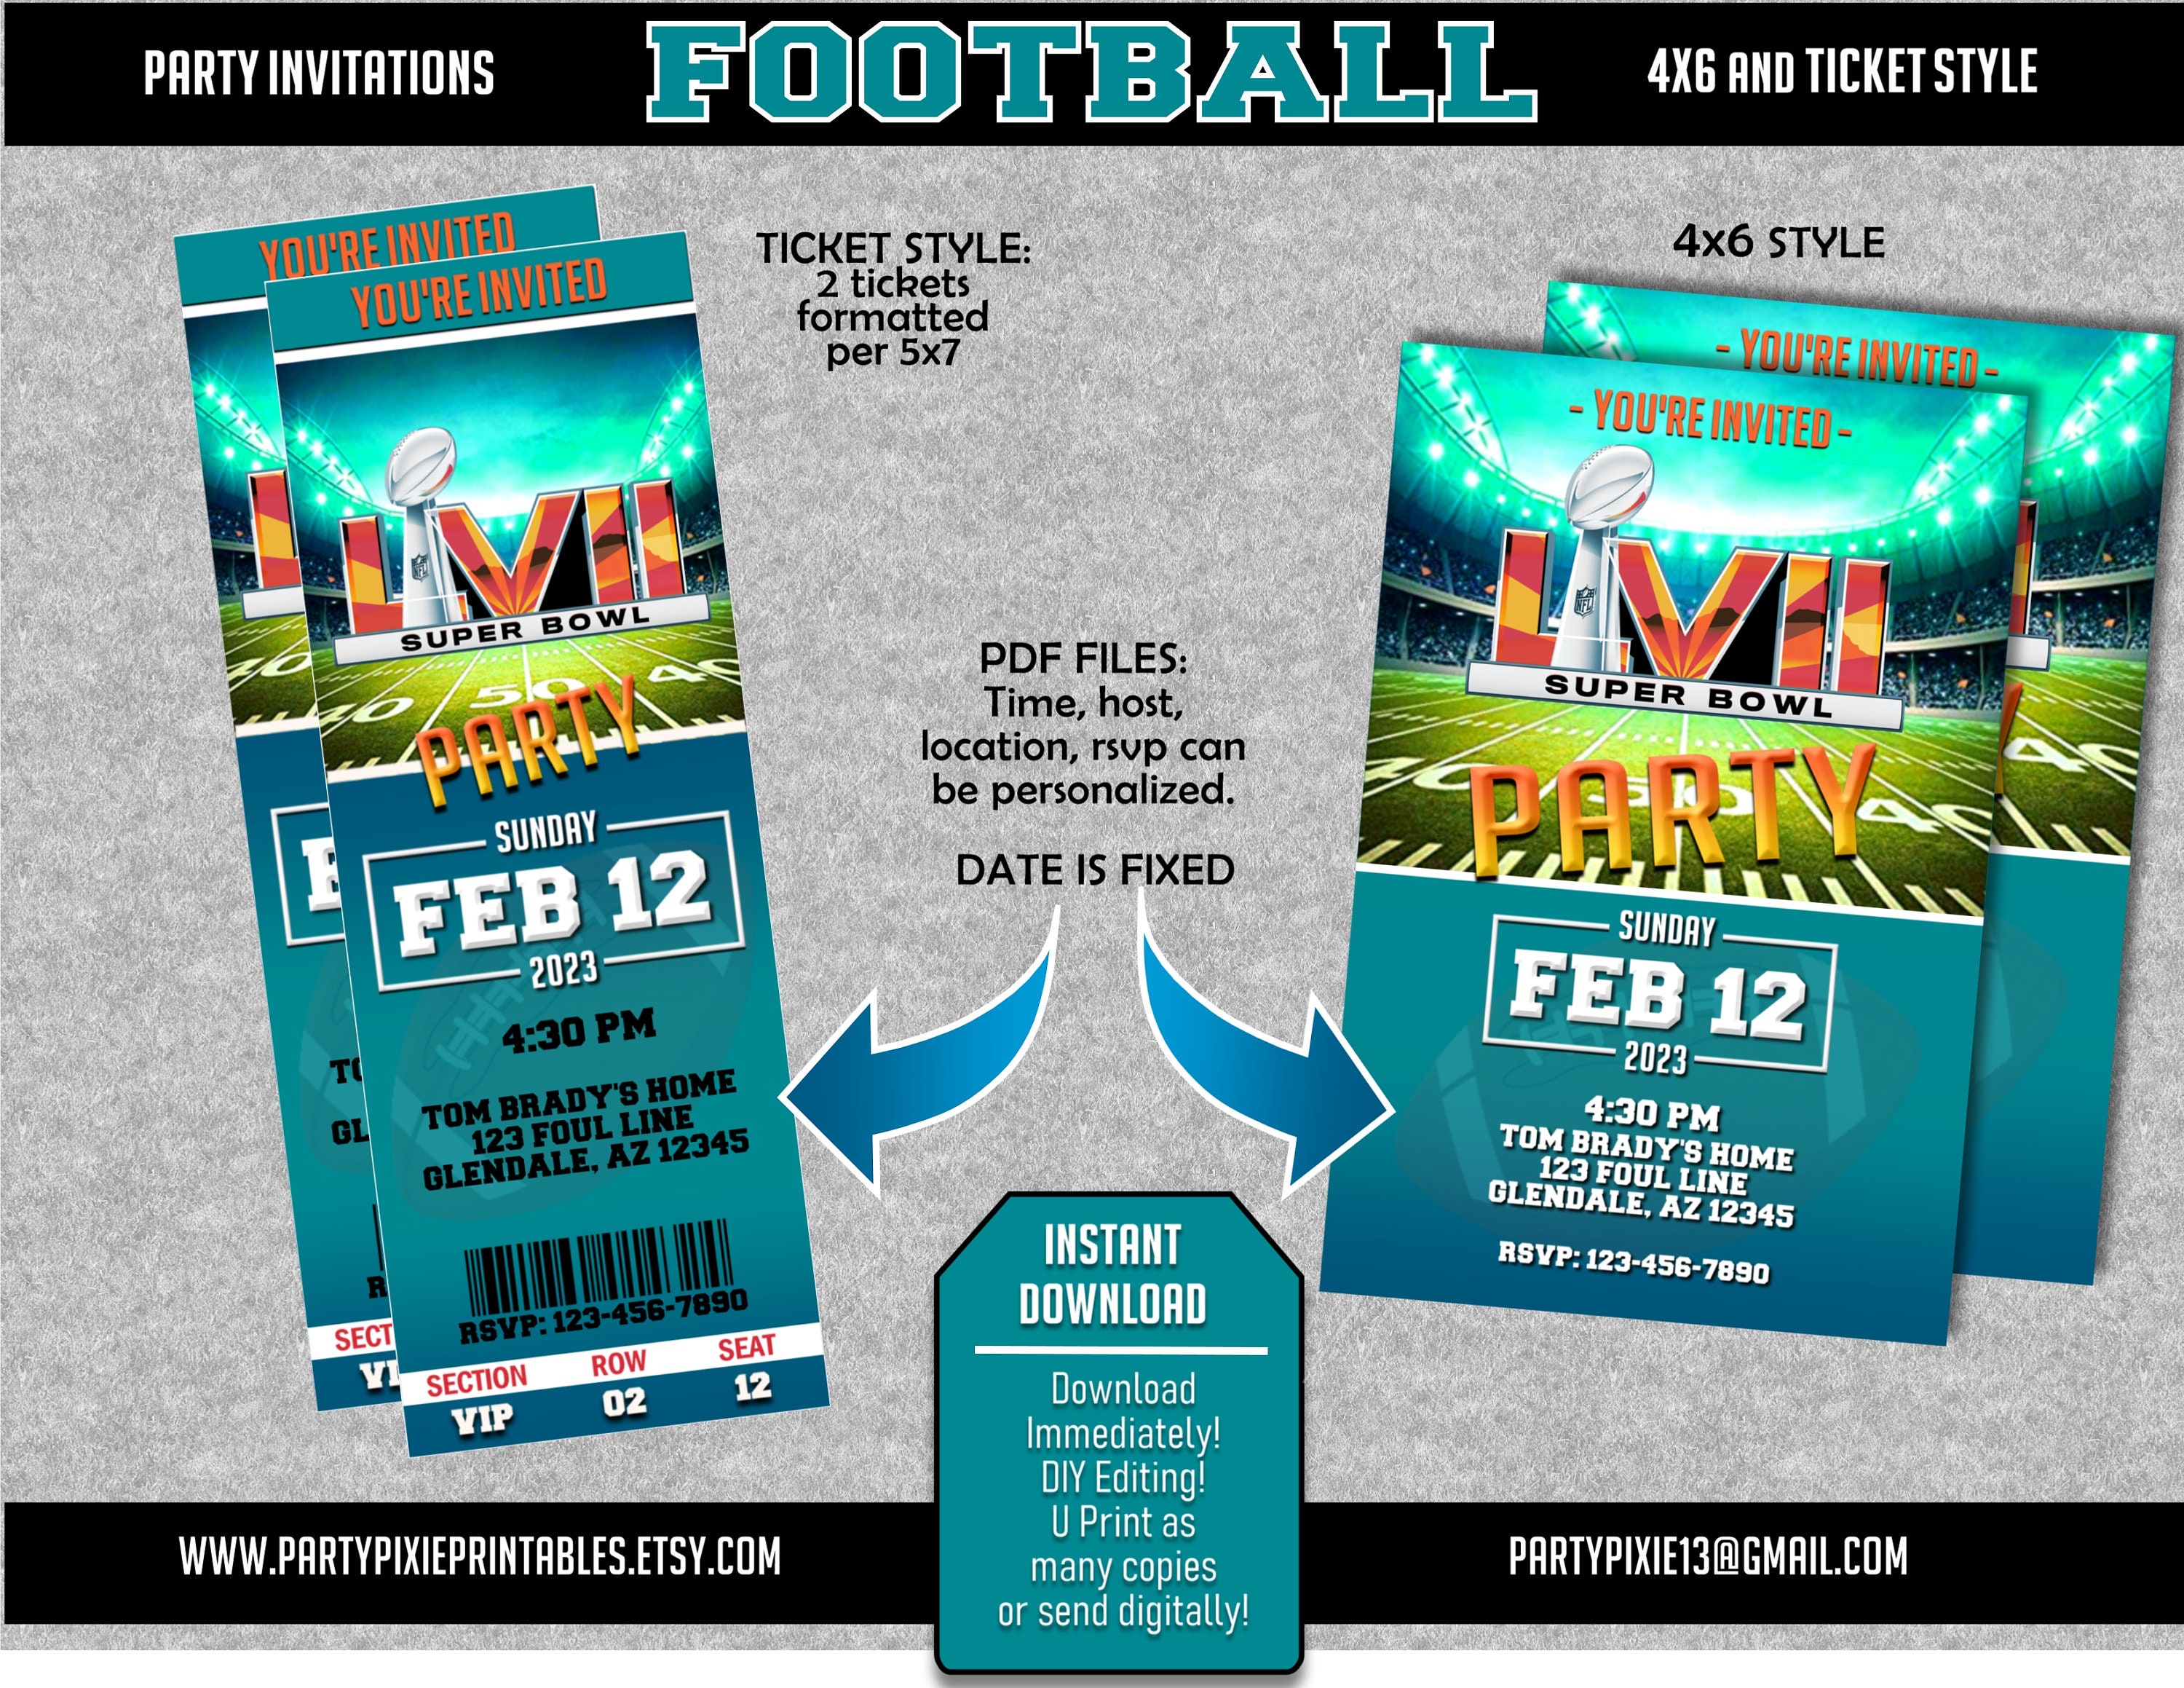 Buy Super Bowl Tickets Online In India -   India